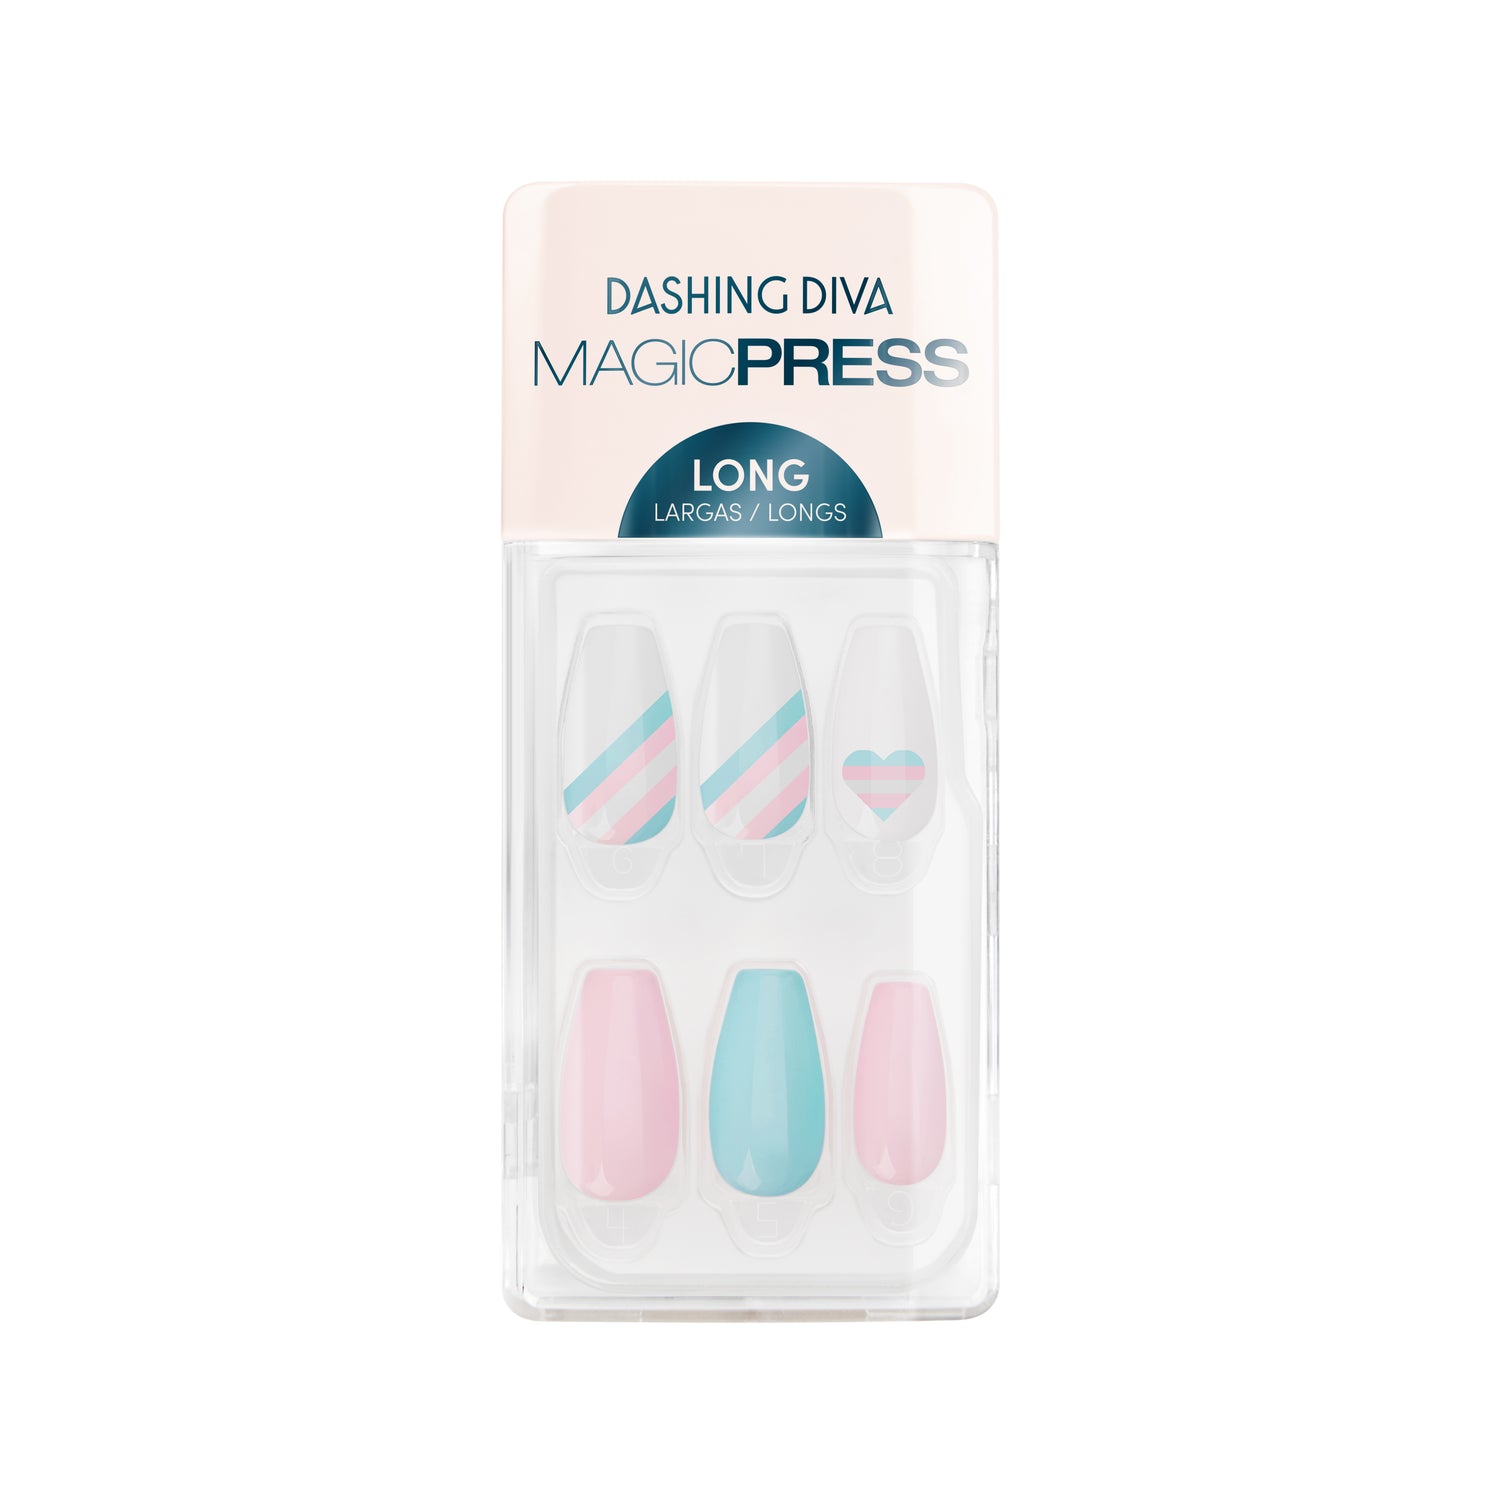 Dashing Diva MAGIC PRESS long, coffin white, pink, and blue press on gel nails with strip & heart accents.